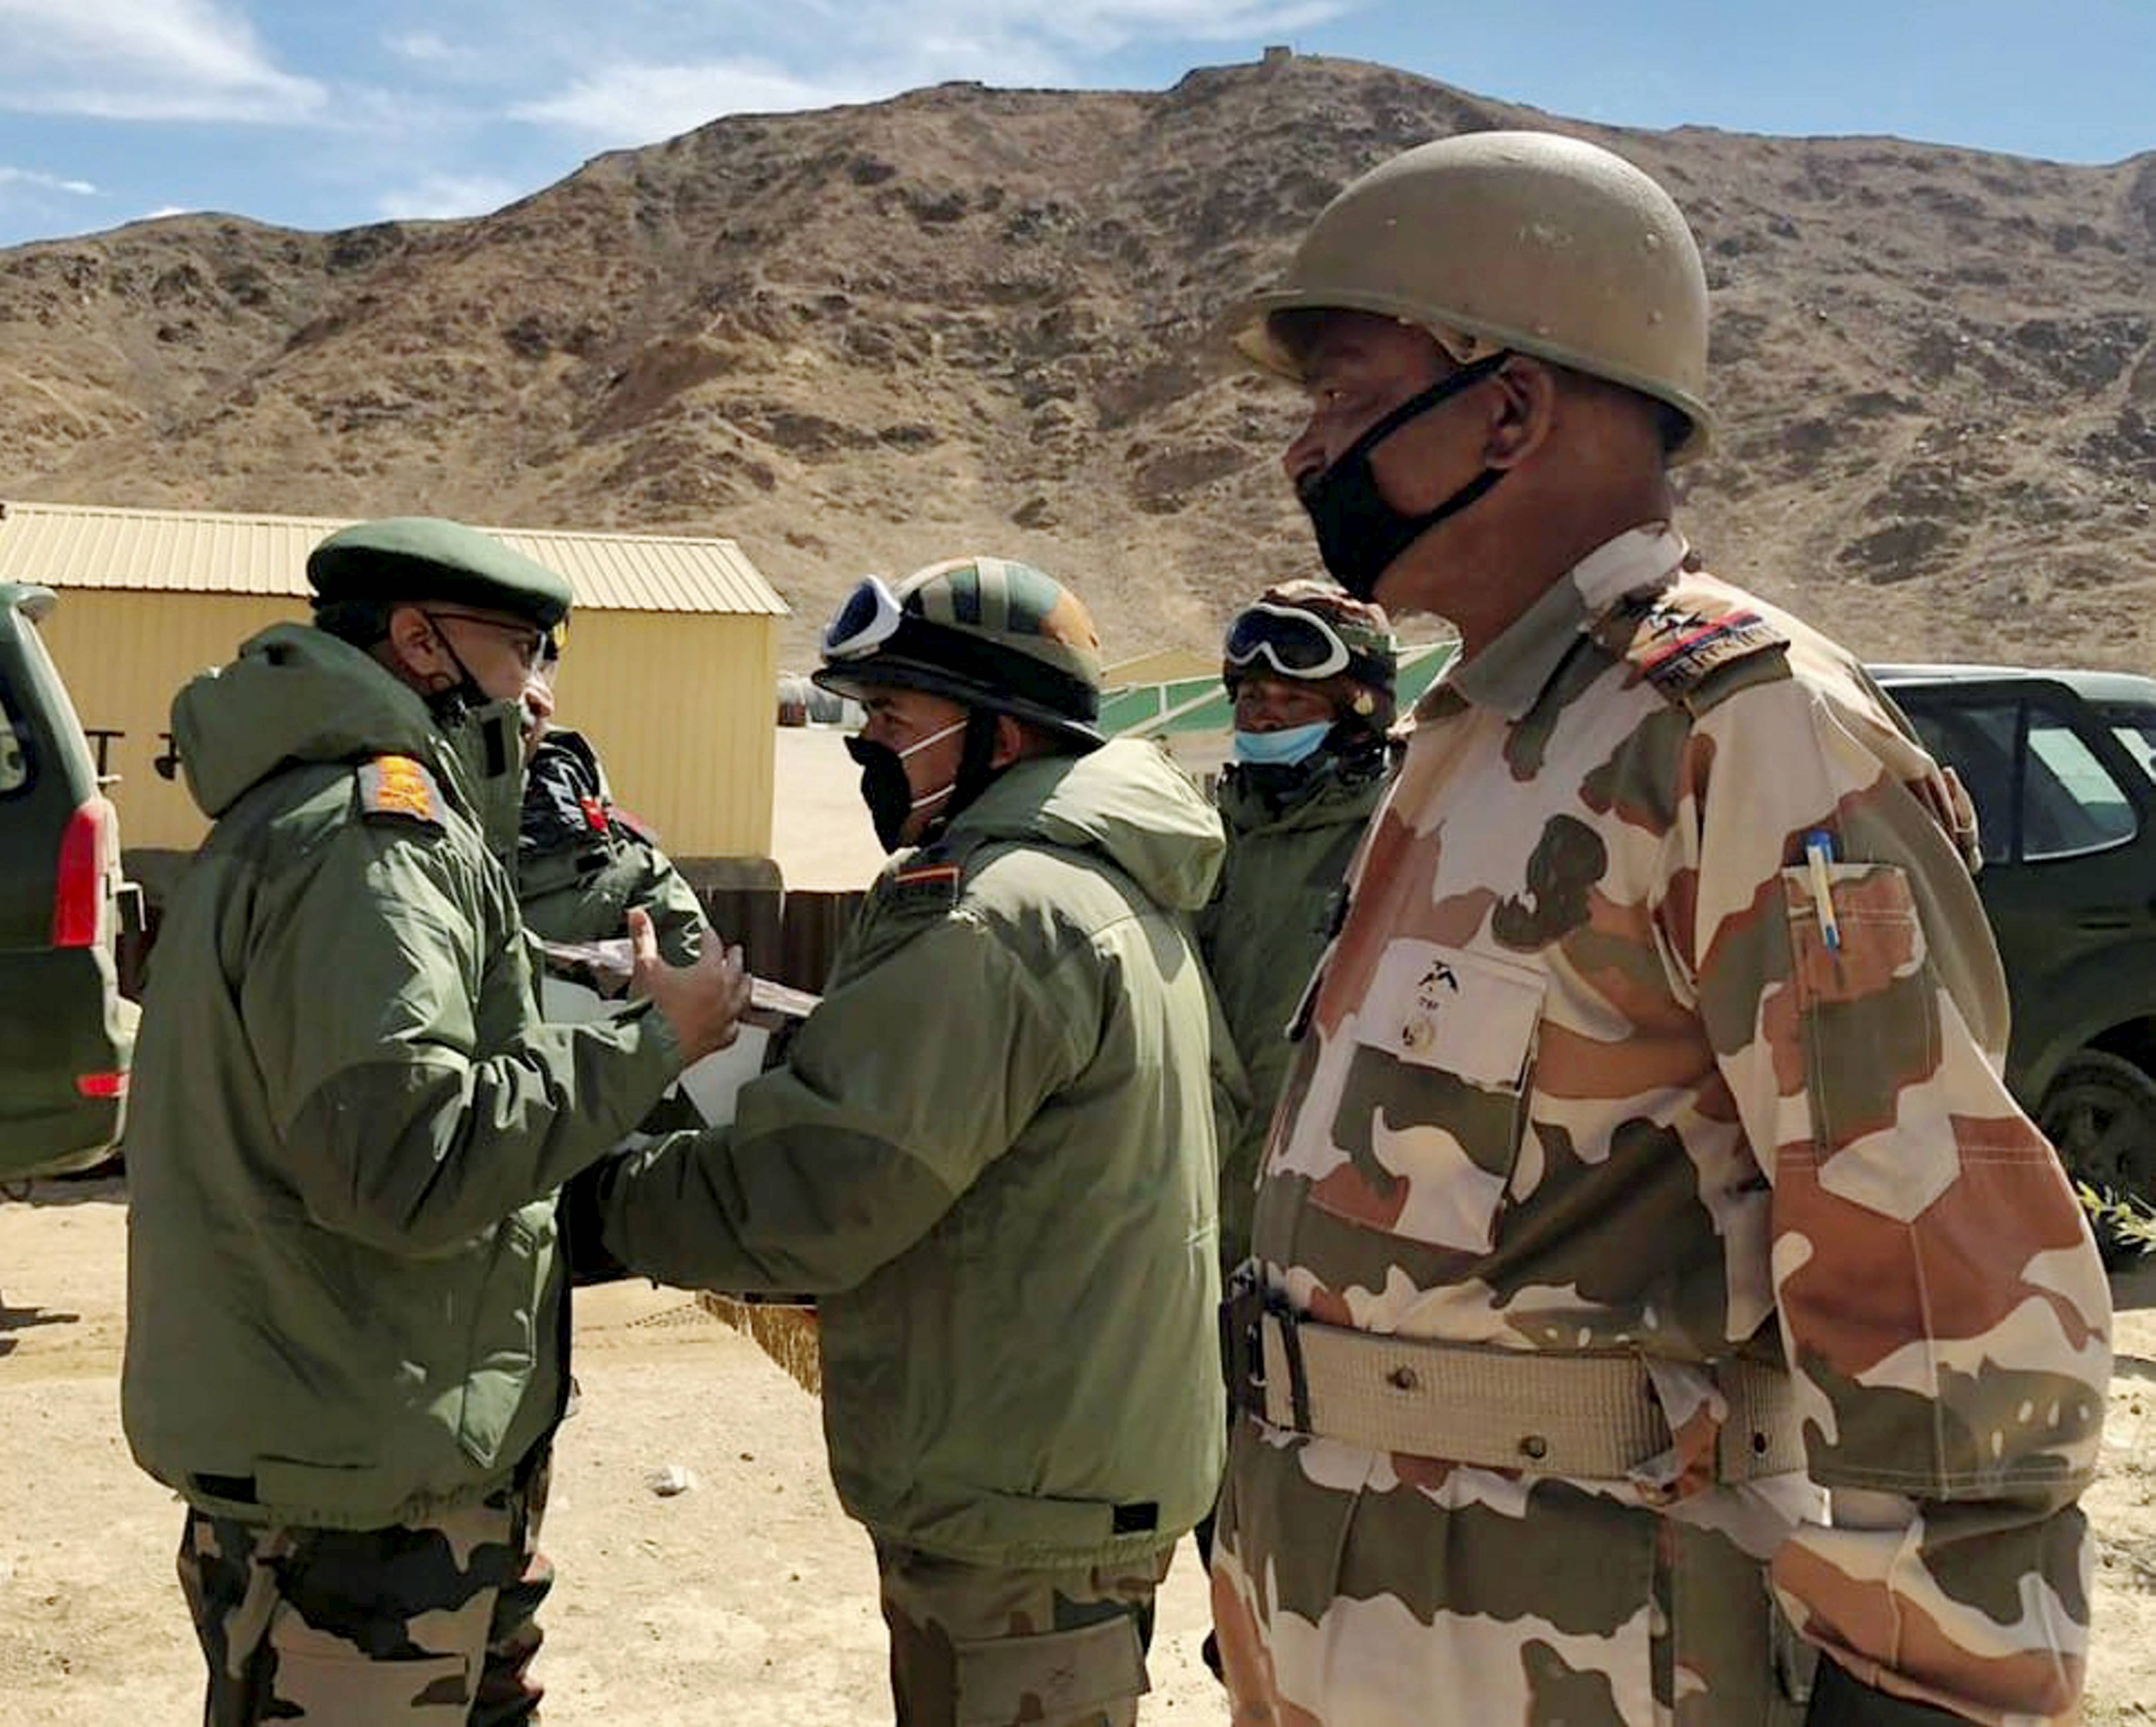 Army chief Gen. M.M. Naravane talks to troopers while reviewing the situation on the ground after the stand-off in eastern Ladakh on June 24 